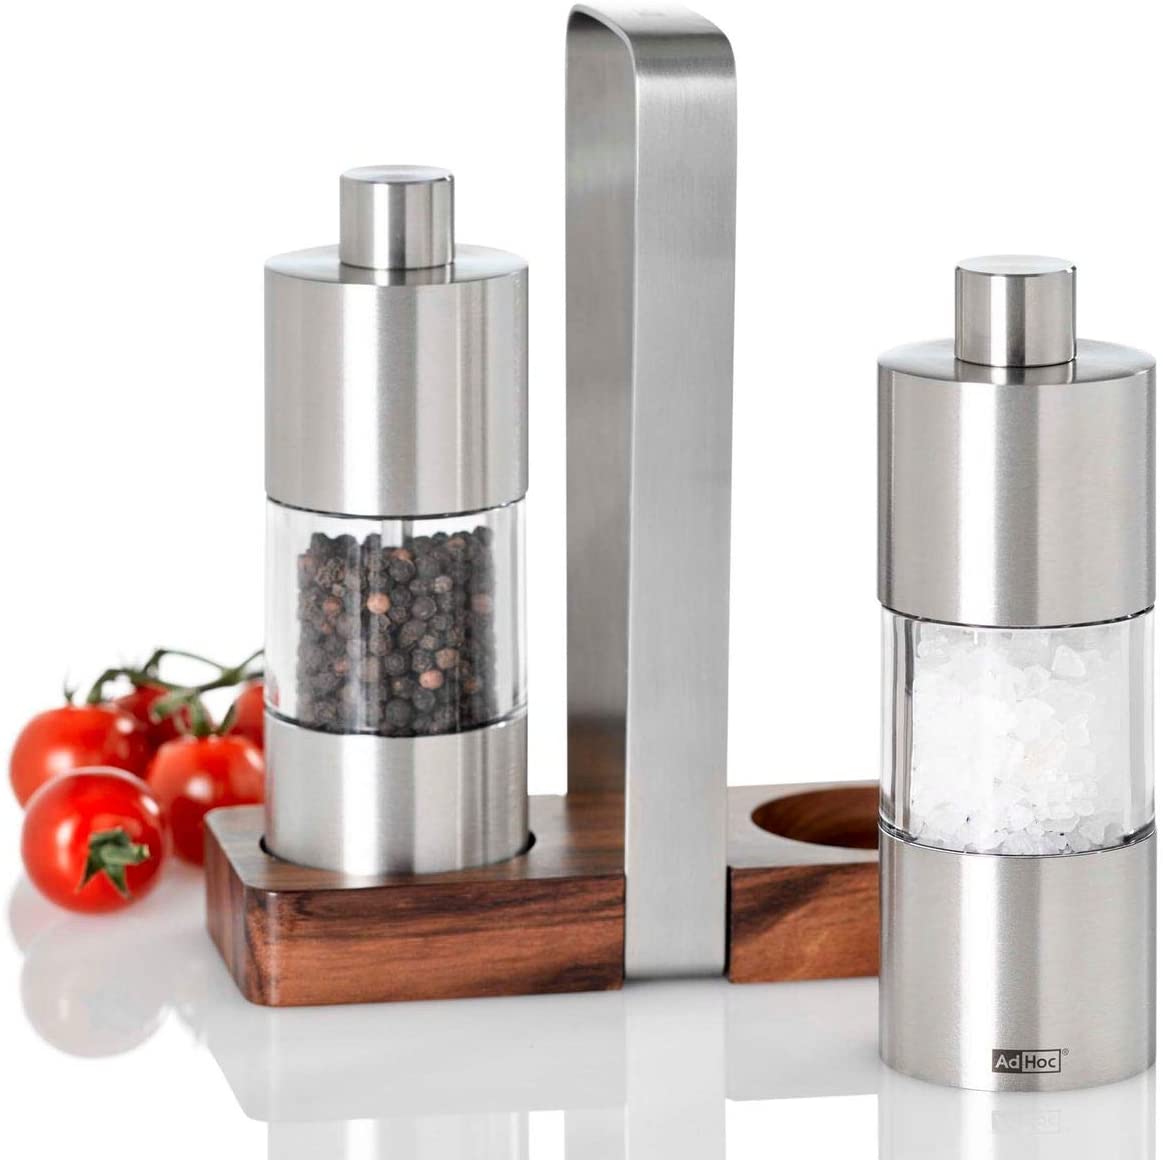 AdHoc ME01 Salt and Pepper Mill Set Stainless Steel, Transparent